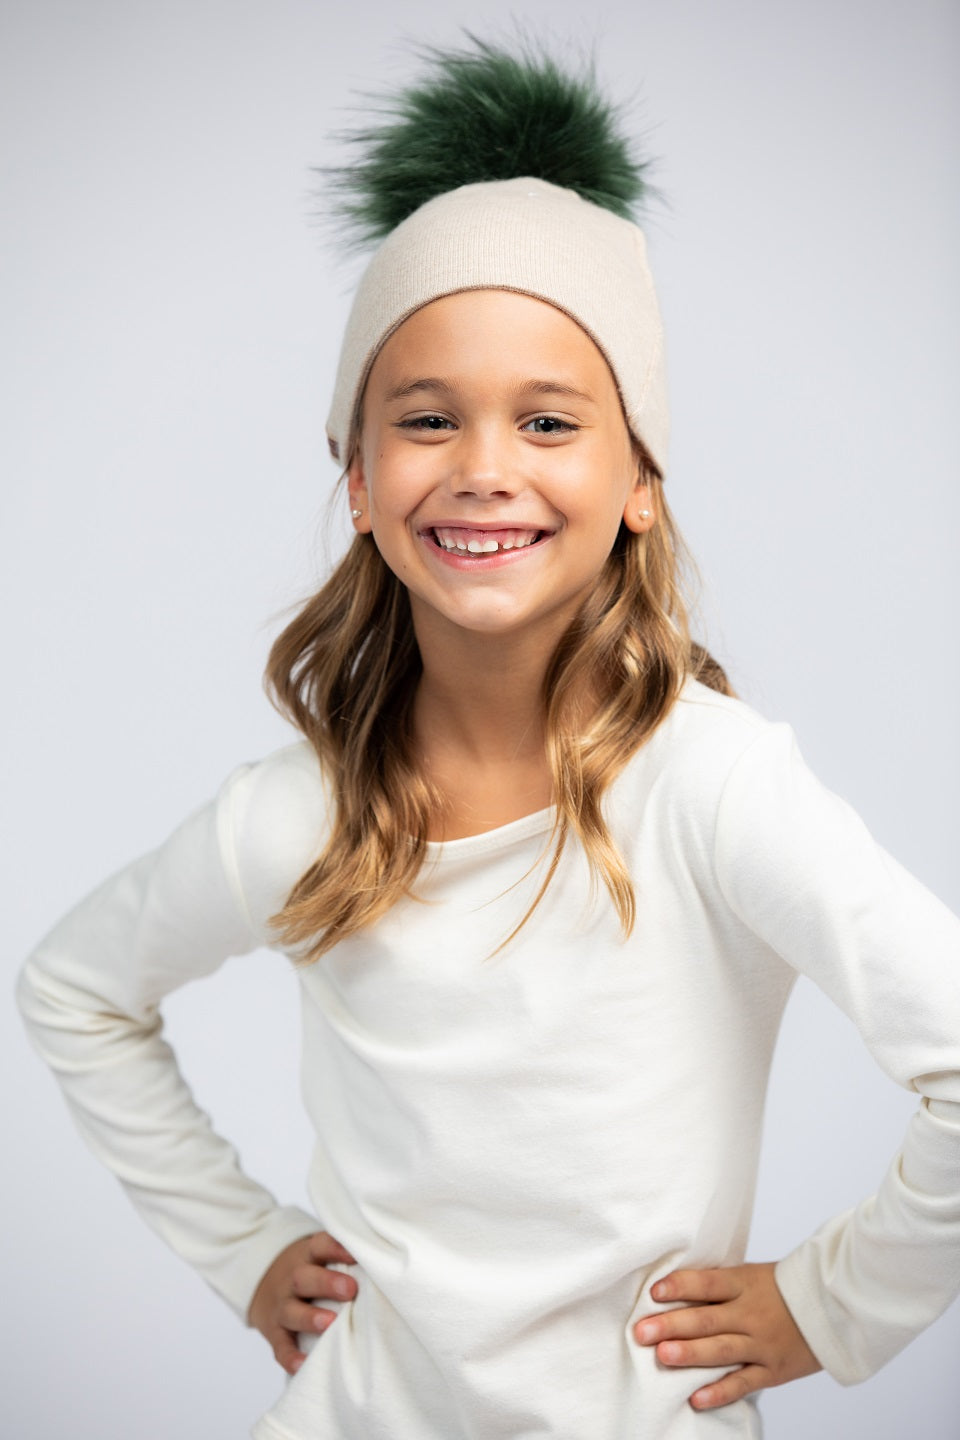 Pebble with Green - Cashmere Beanie for Kids